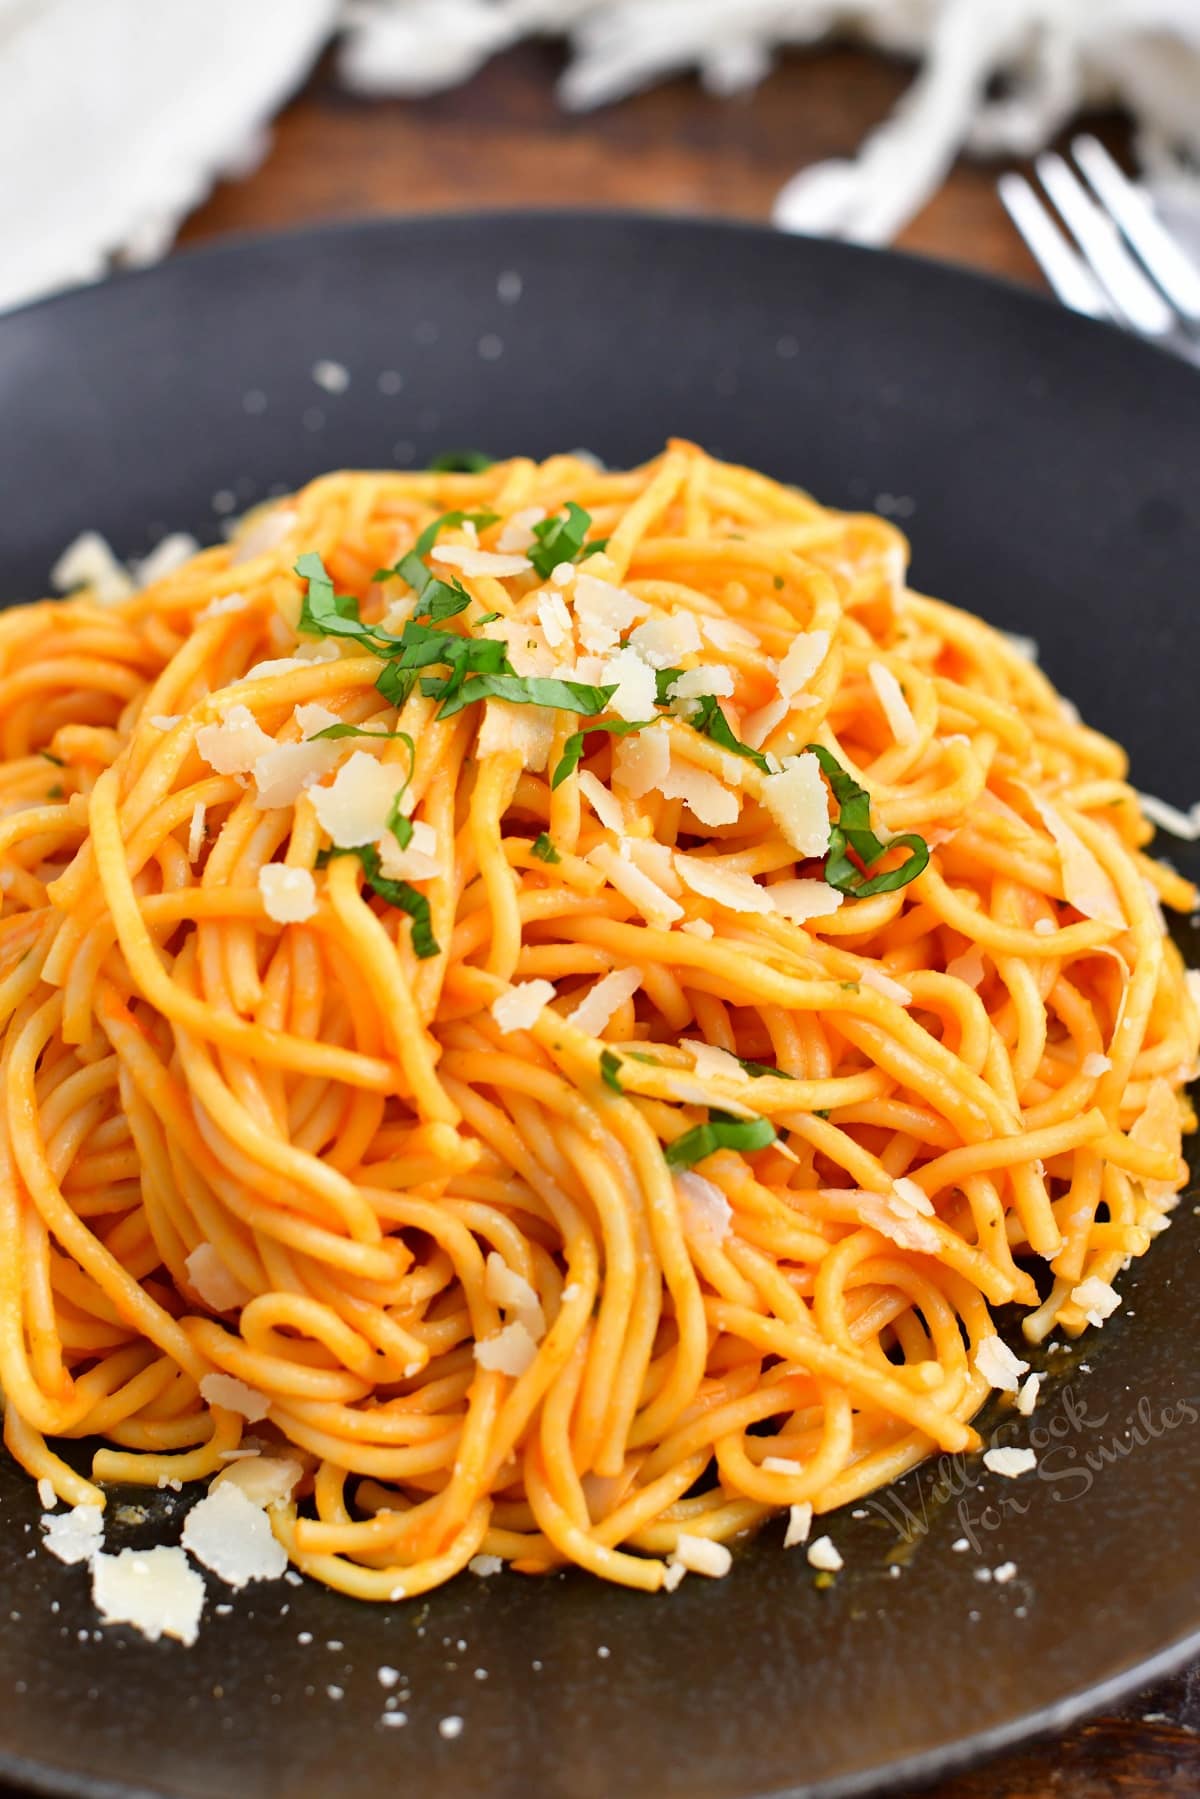 spaghetti coated in Pomodoro sauce on a dark plate with Parmesan and basil